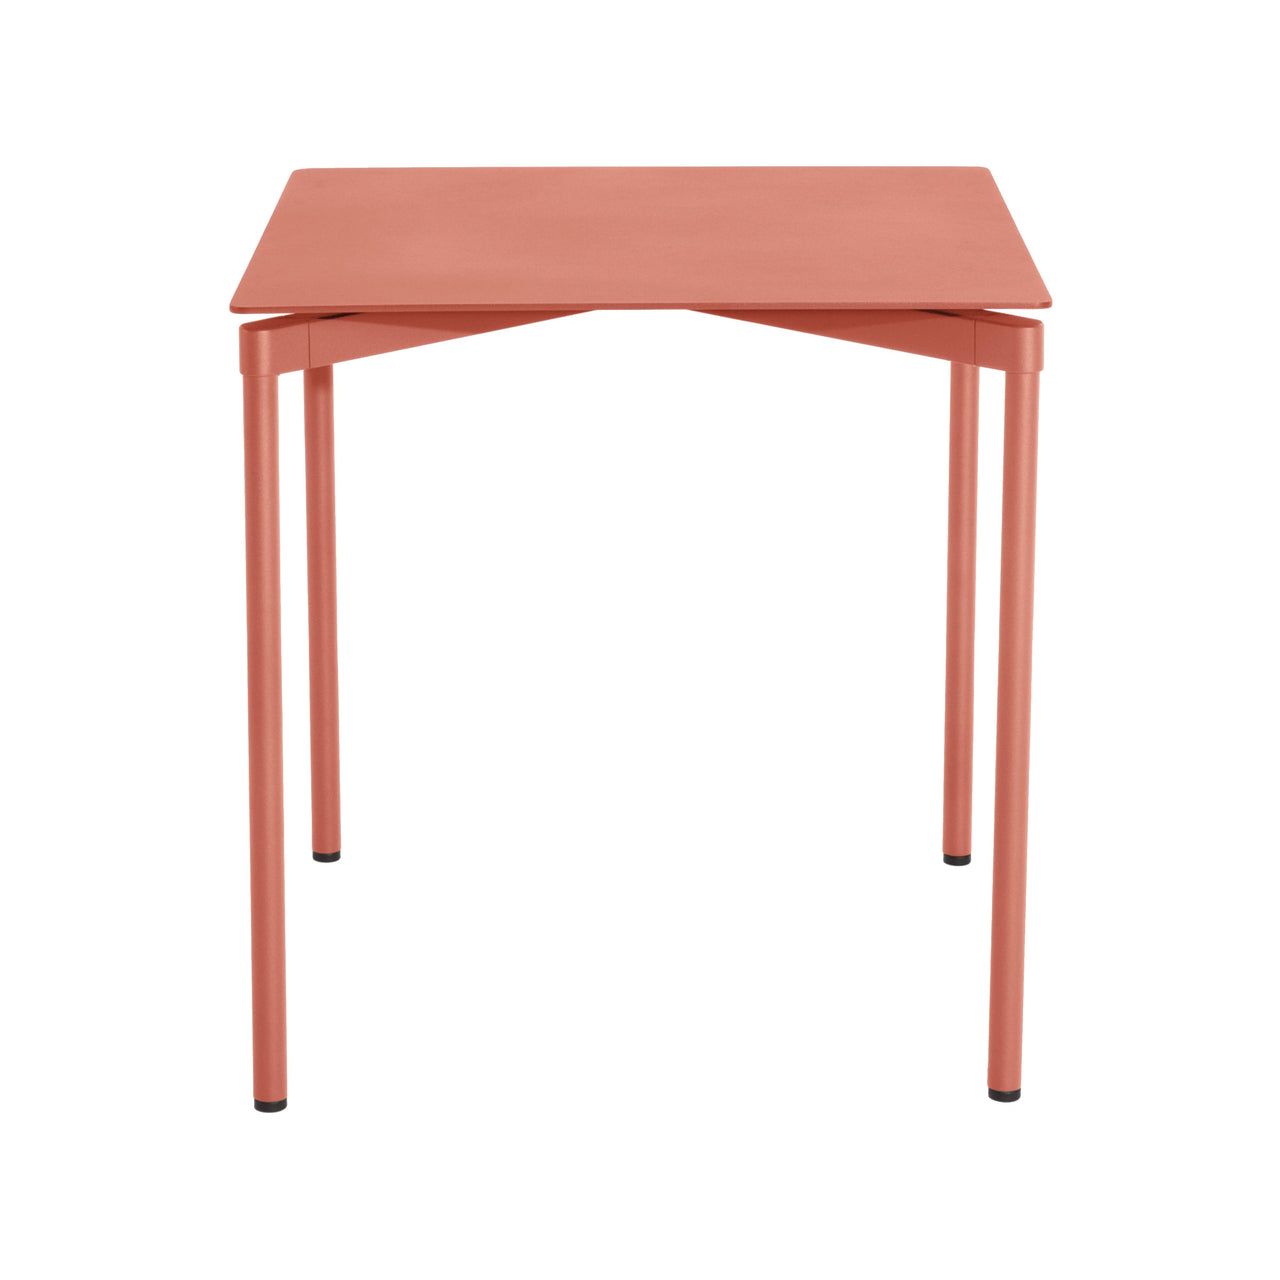 Fromme Dining Table: Square + Coral